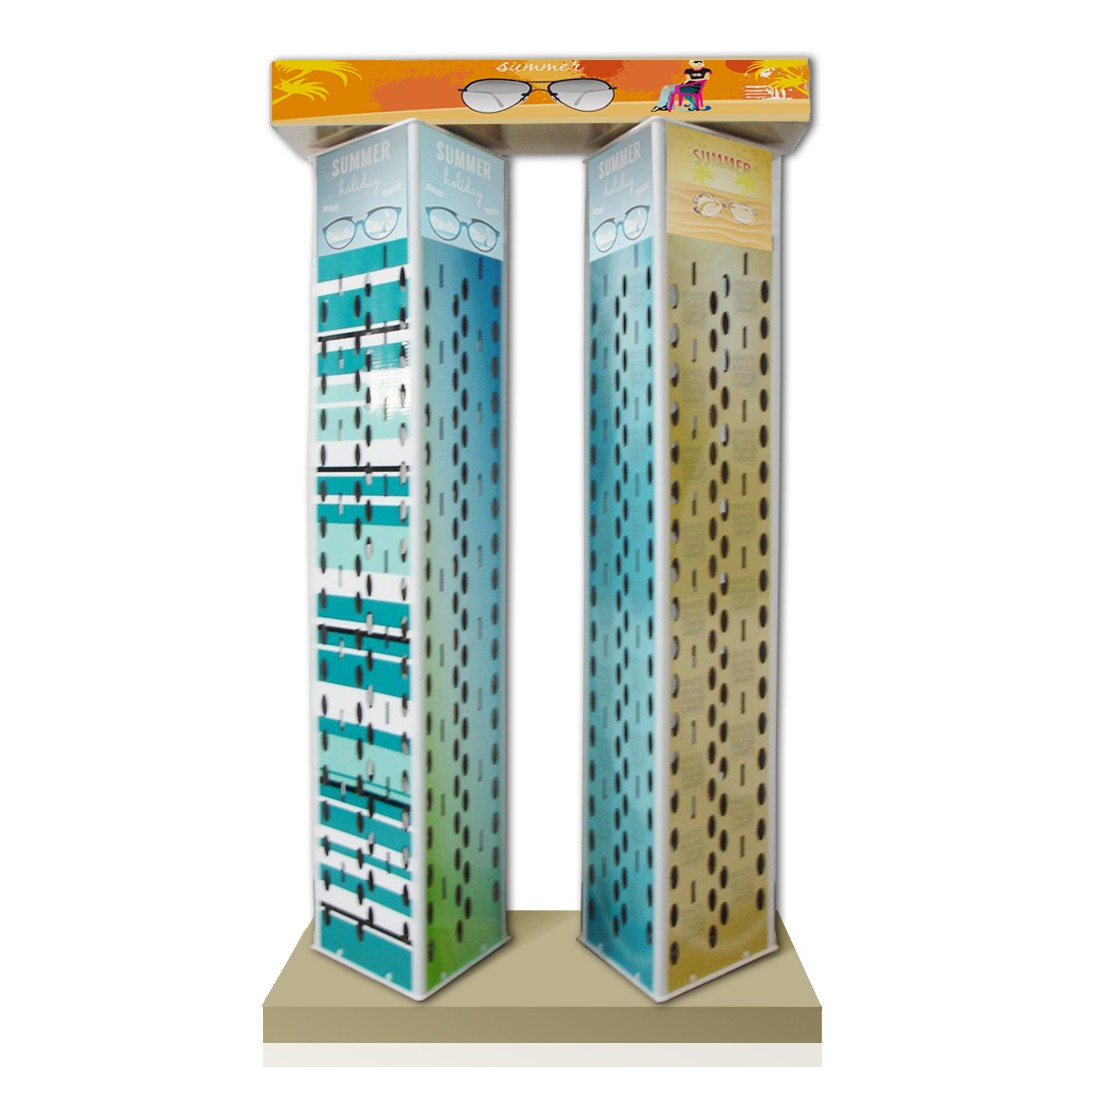 A-50 Floor display stand